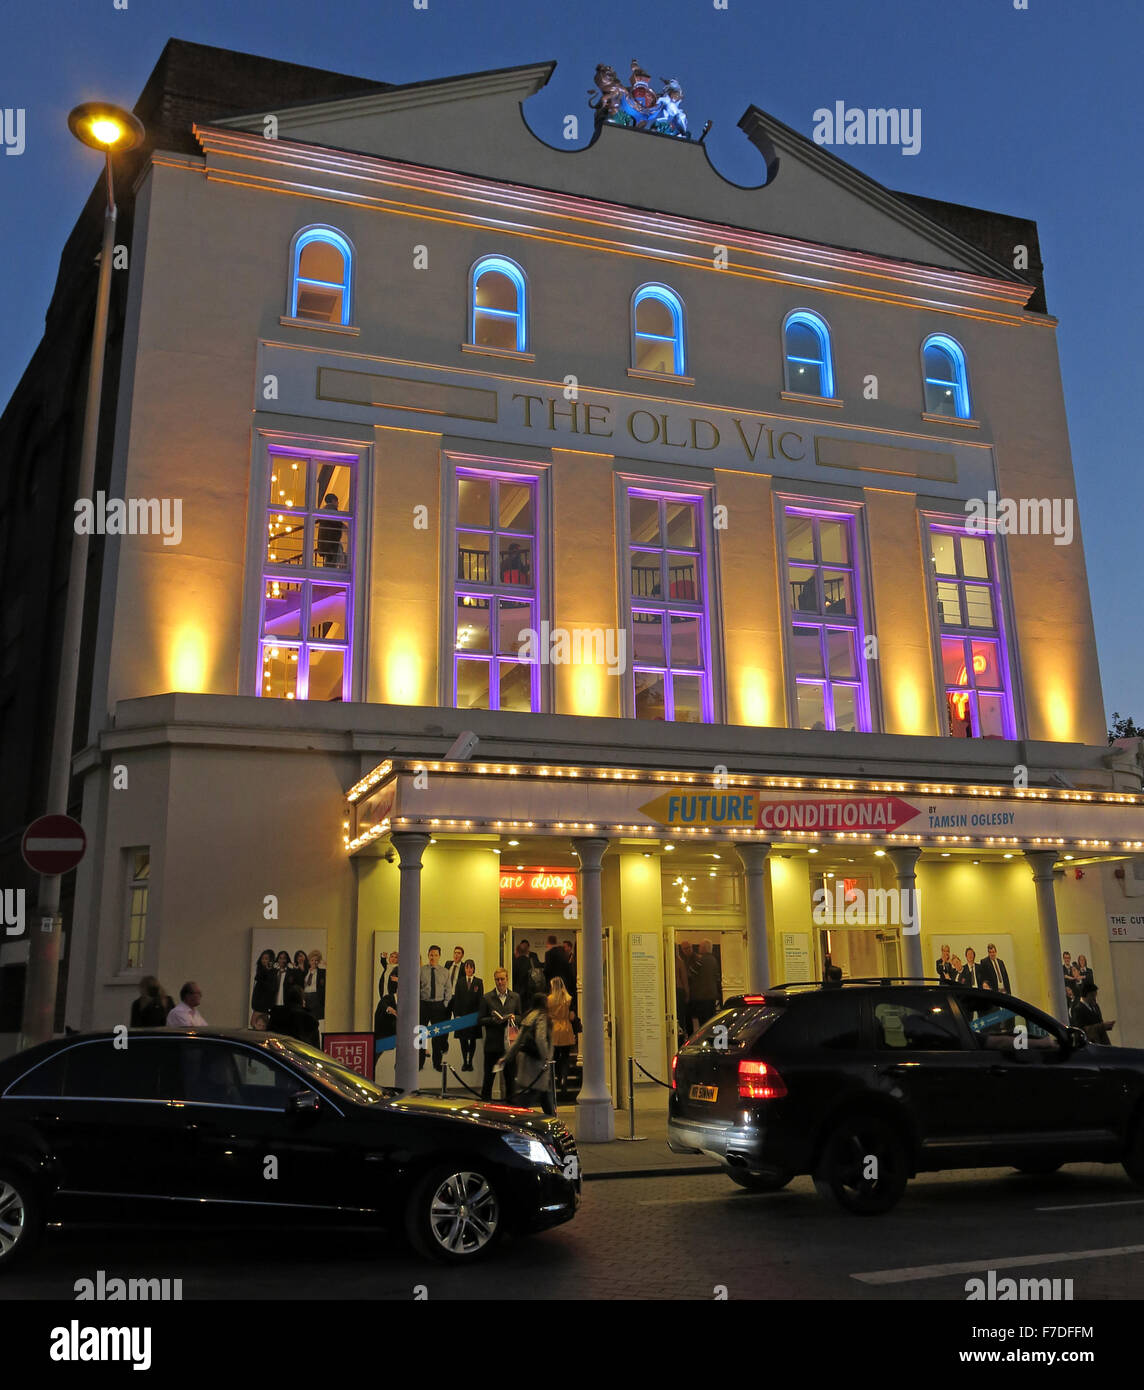 The Old Vic Theatre at dusk,Waterloo Rd,Borough of Lambeth,Greater London,England UK Stock Photo